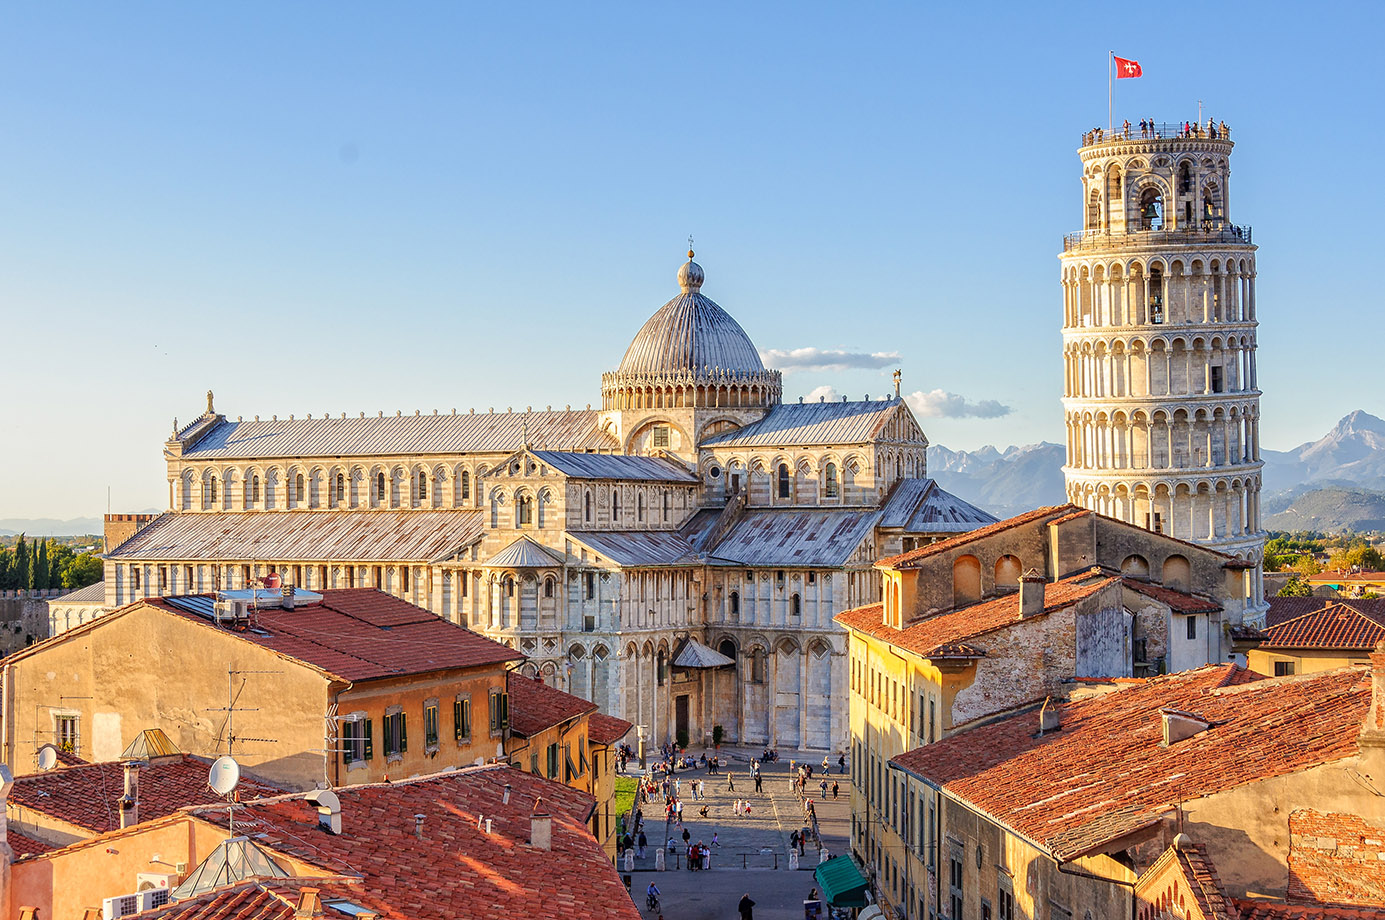 flydubai launches flights to Pisa in Italy and resumes operations to Catania in Sicily